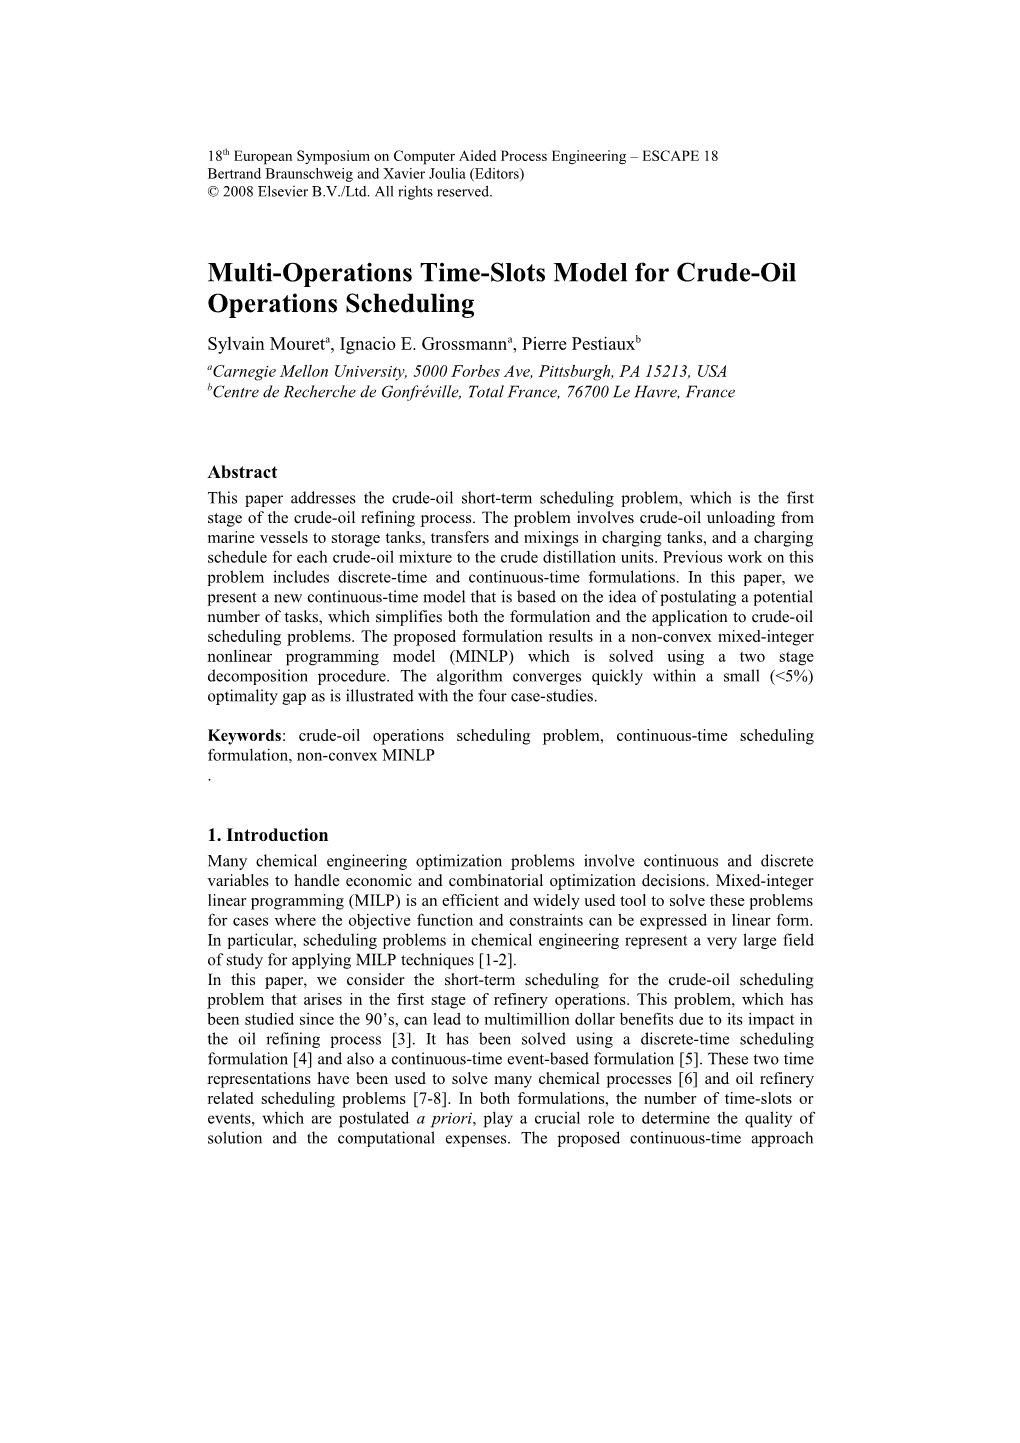 Multi-Operations Time-Slots Model for Crude Oil Operations Scheduling